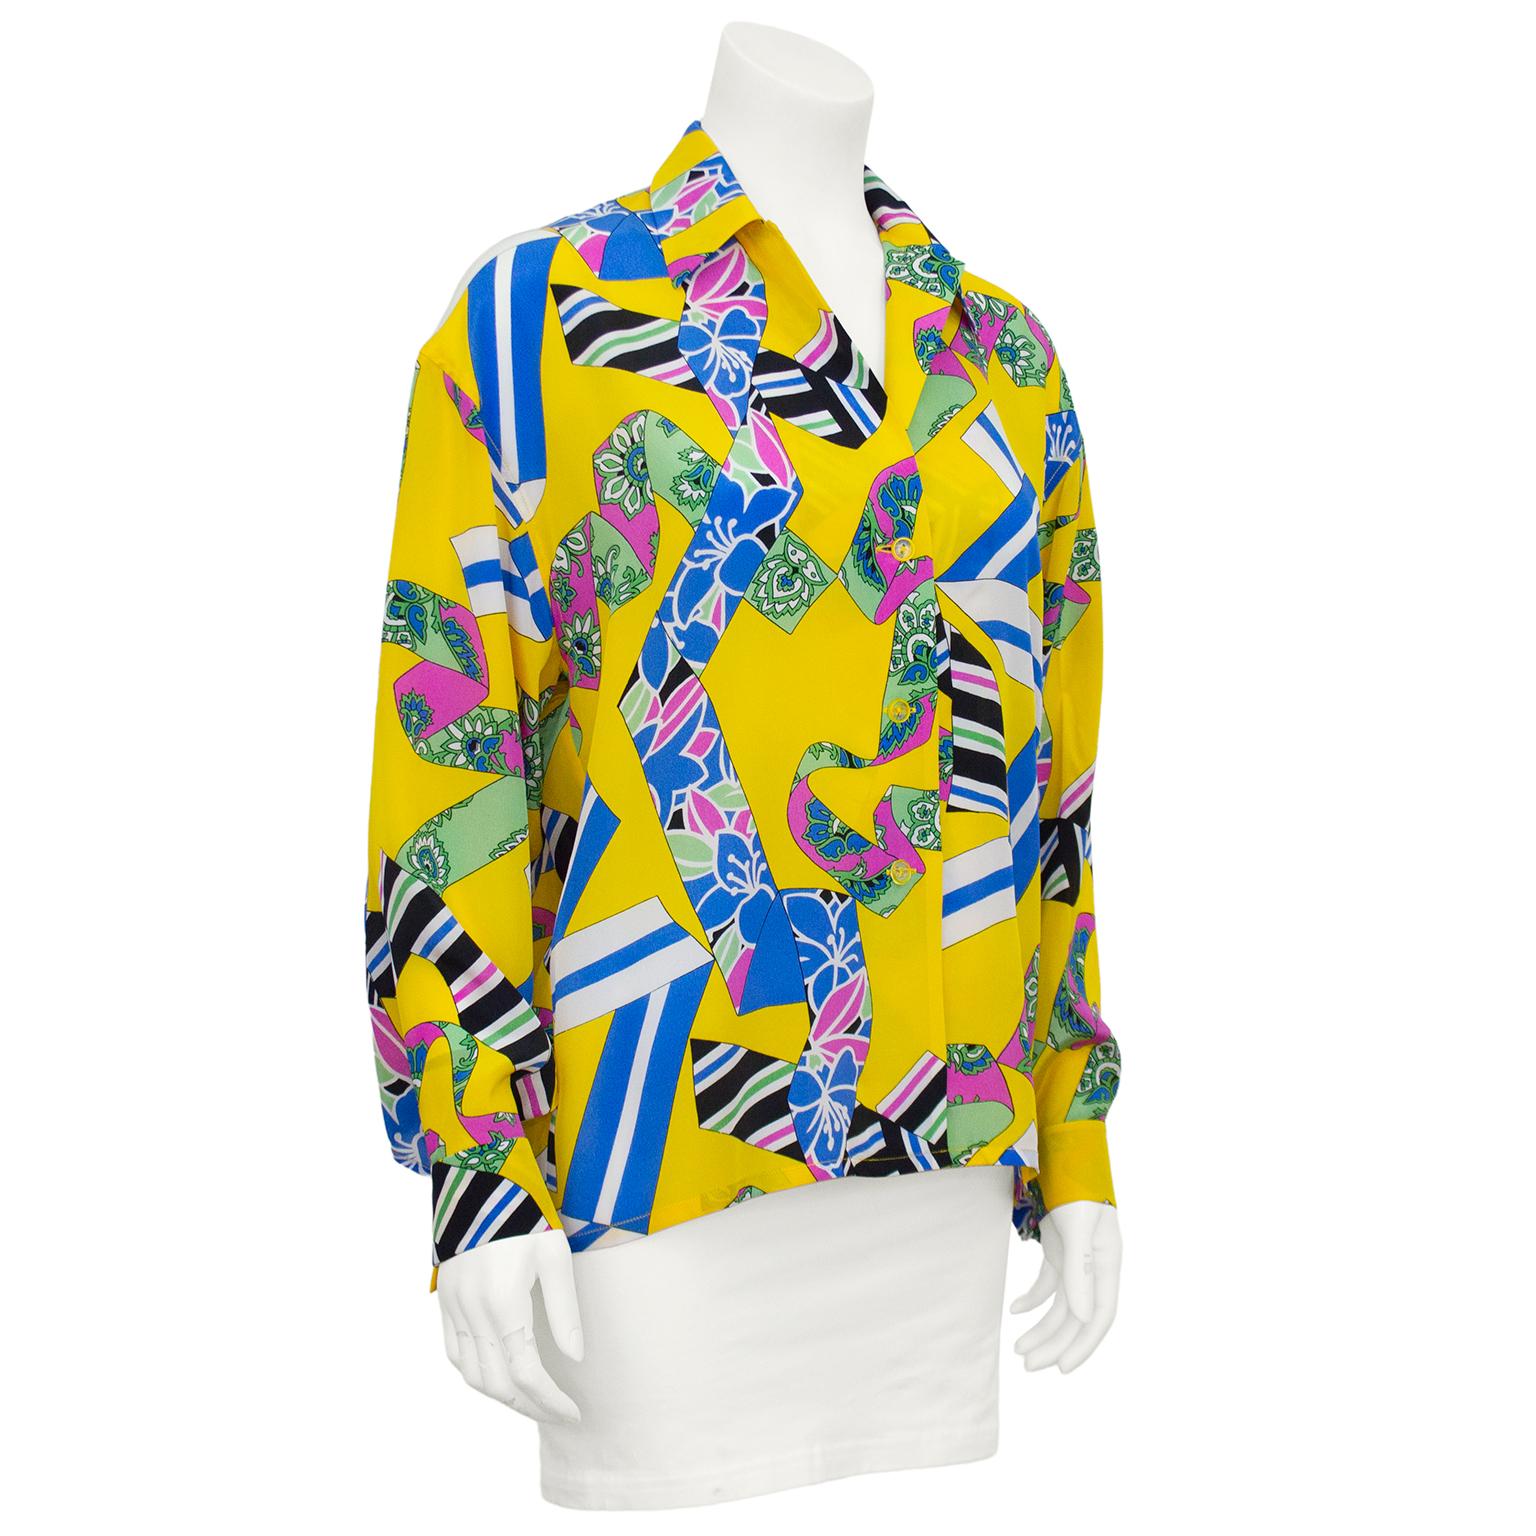 1980s Pierre Balmain blouse. Yellow with the look of four different ribbon patterned silk scarves blowing in the wind. One black with white, pink, blue and green diagonal stripes. The second, blue and white. The third, pink and green paisley. And